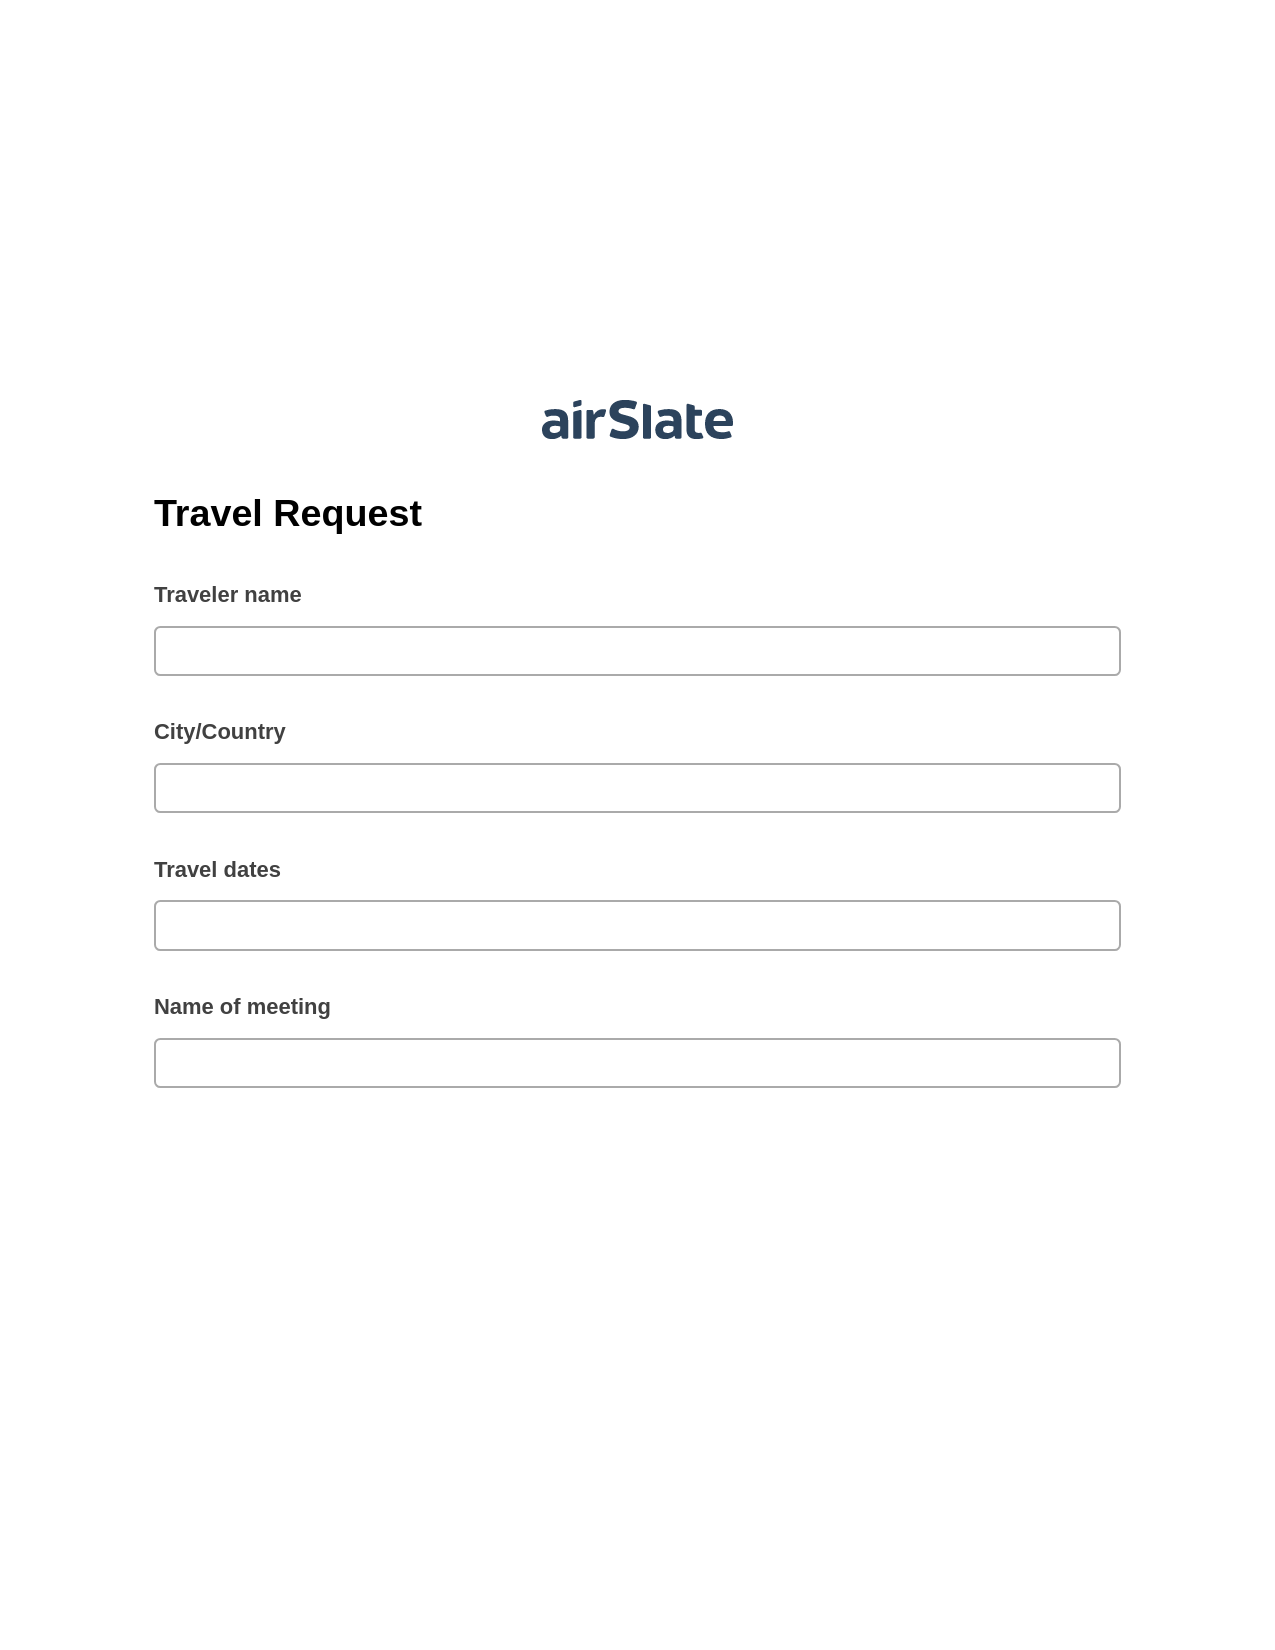 Travel Request Pre-fill from Litmos bot, Create slate addon, Export to Excel 365 Bot